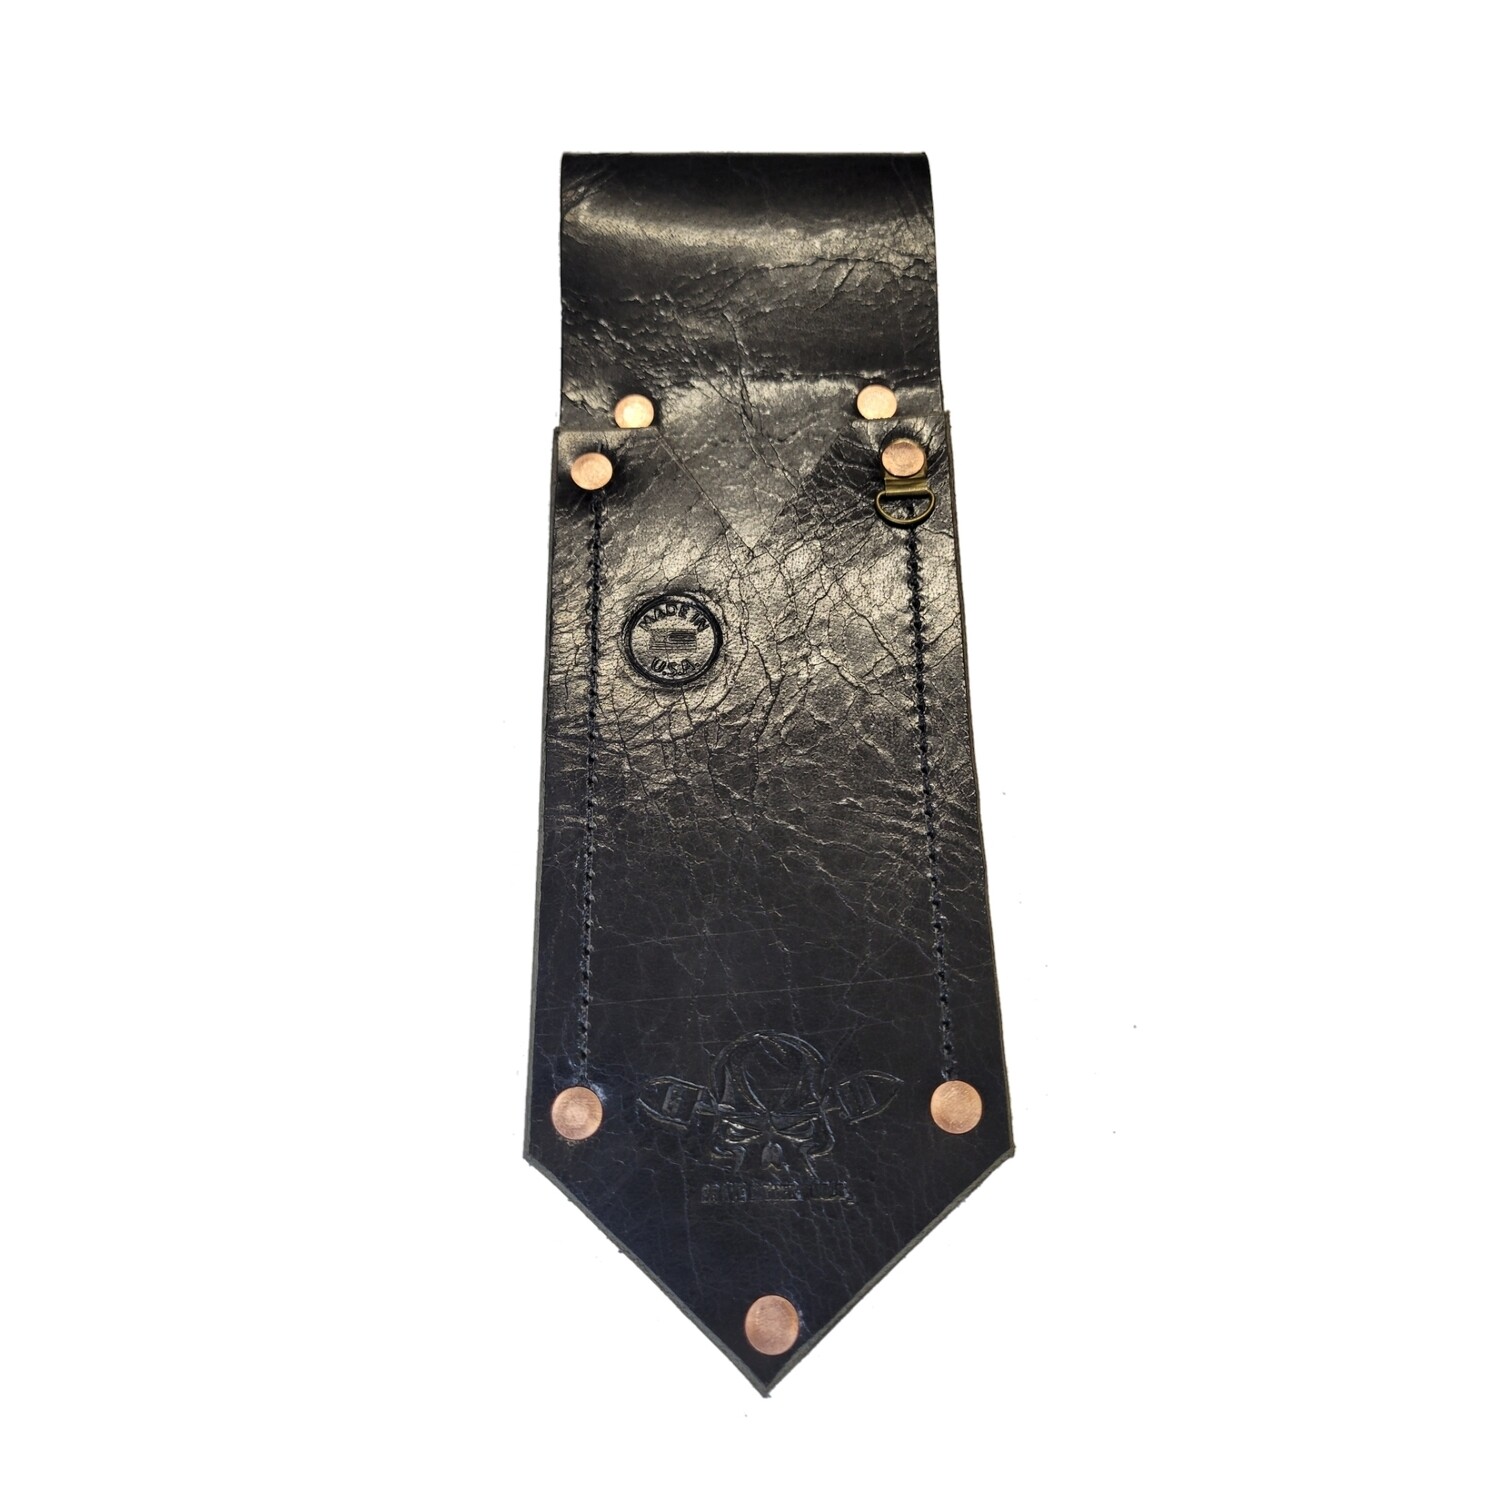 Custom Black Water Buffalo Leather Sheath With or Without Pinpointer Loop